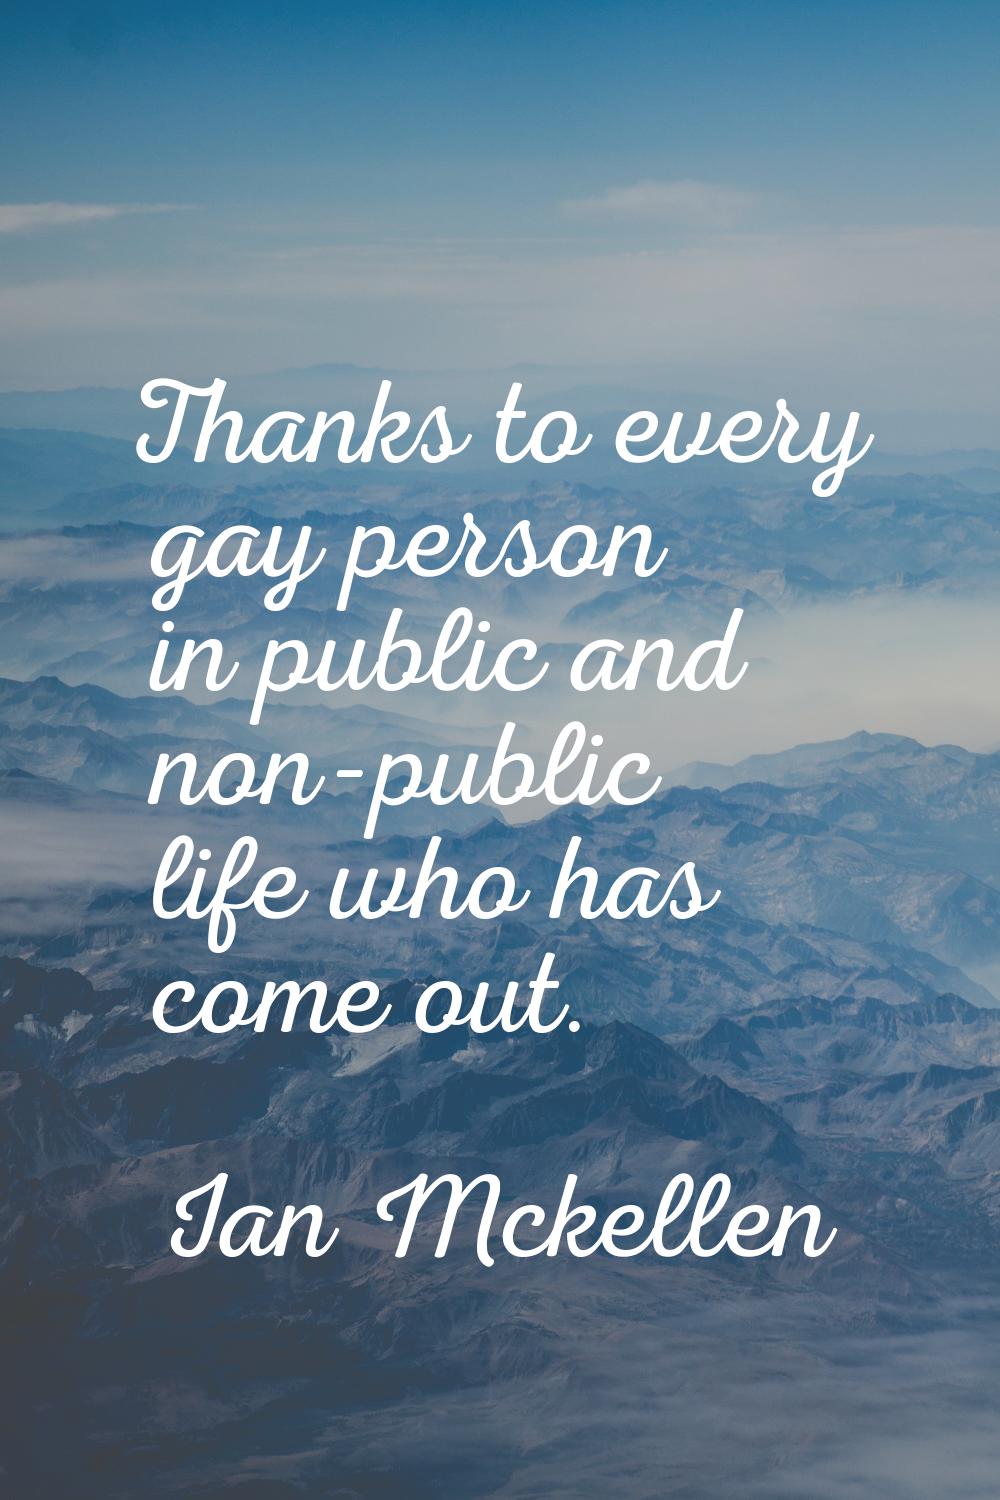 Thanks to every gay person in public and non-public life who has come out.